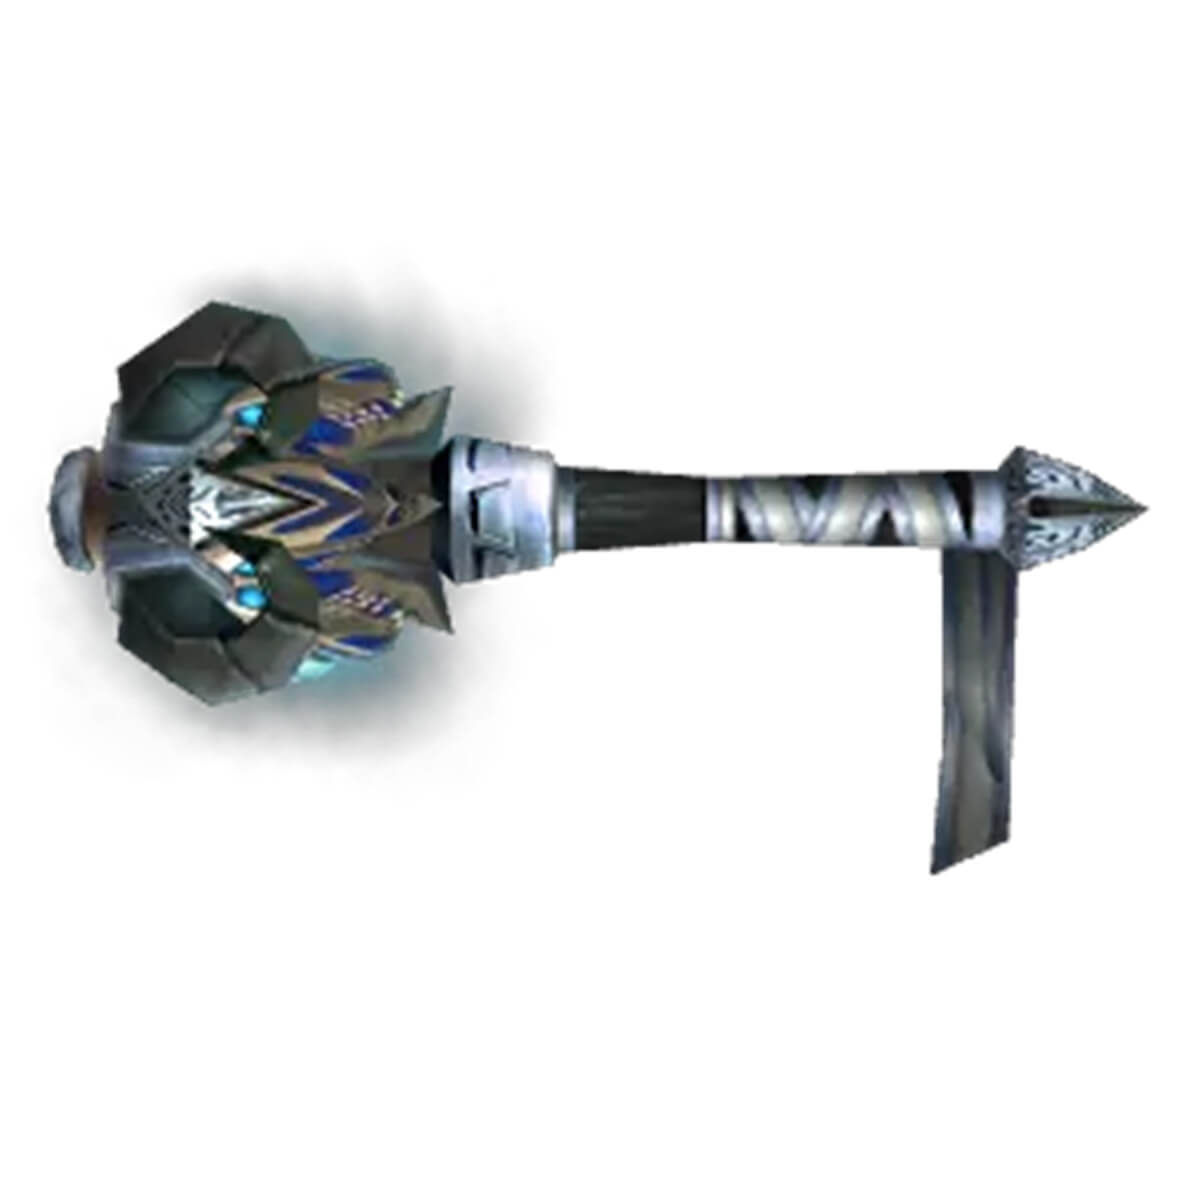 WotLK weapons-2